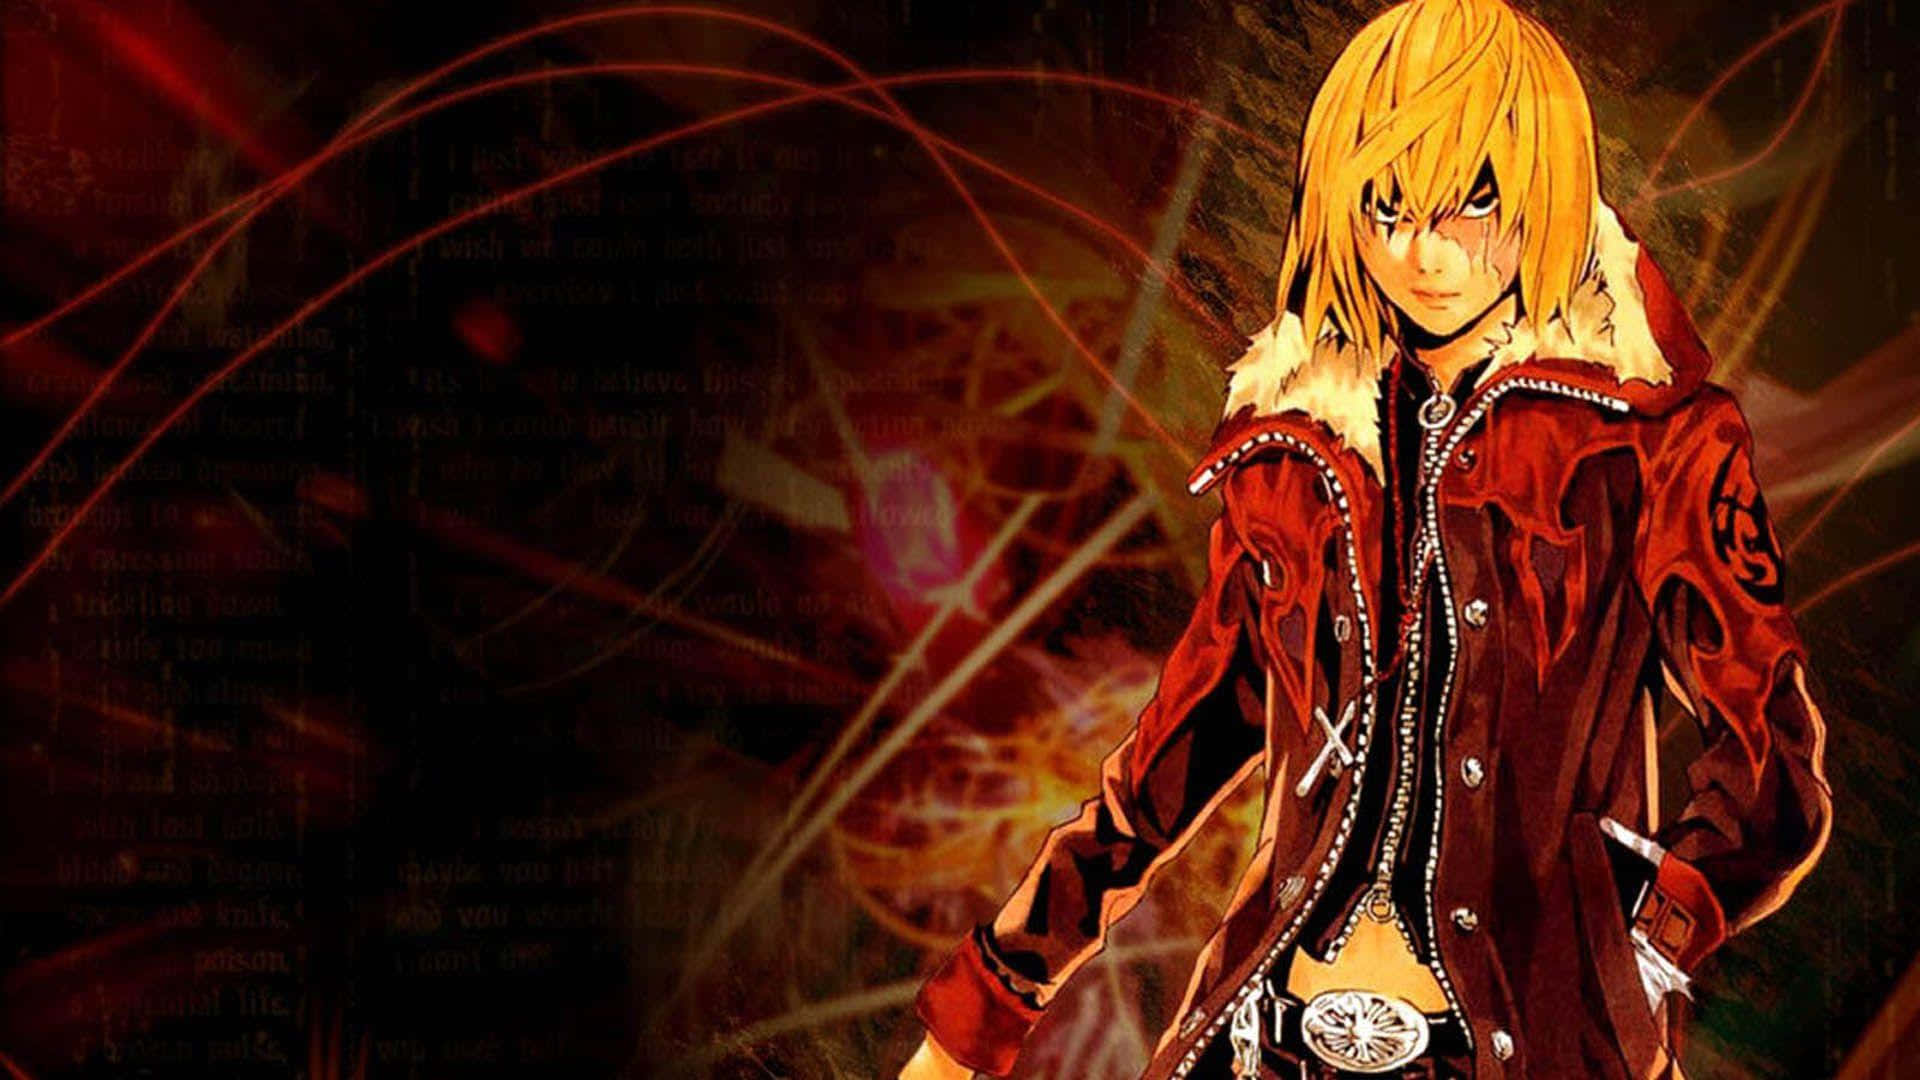 Intense Glance of Mello from Death Note Wallpaper